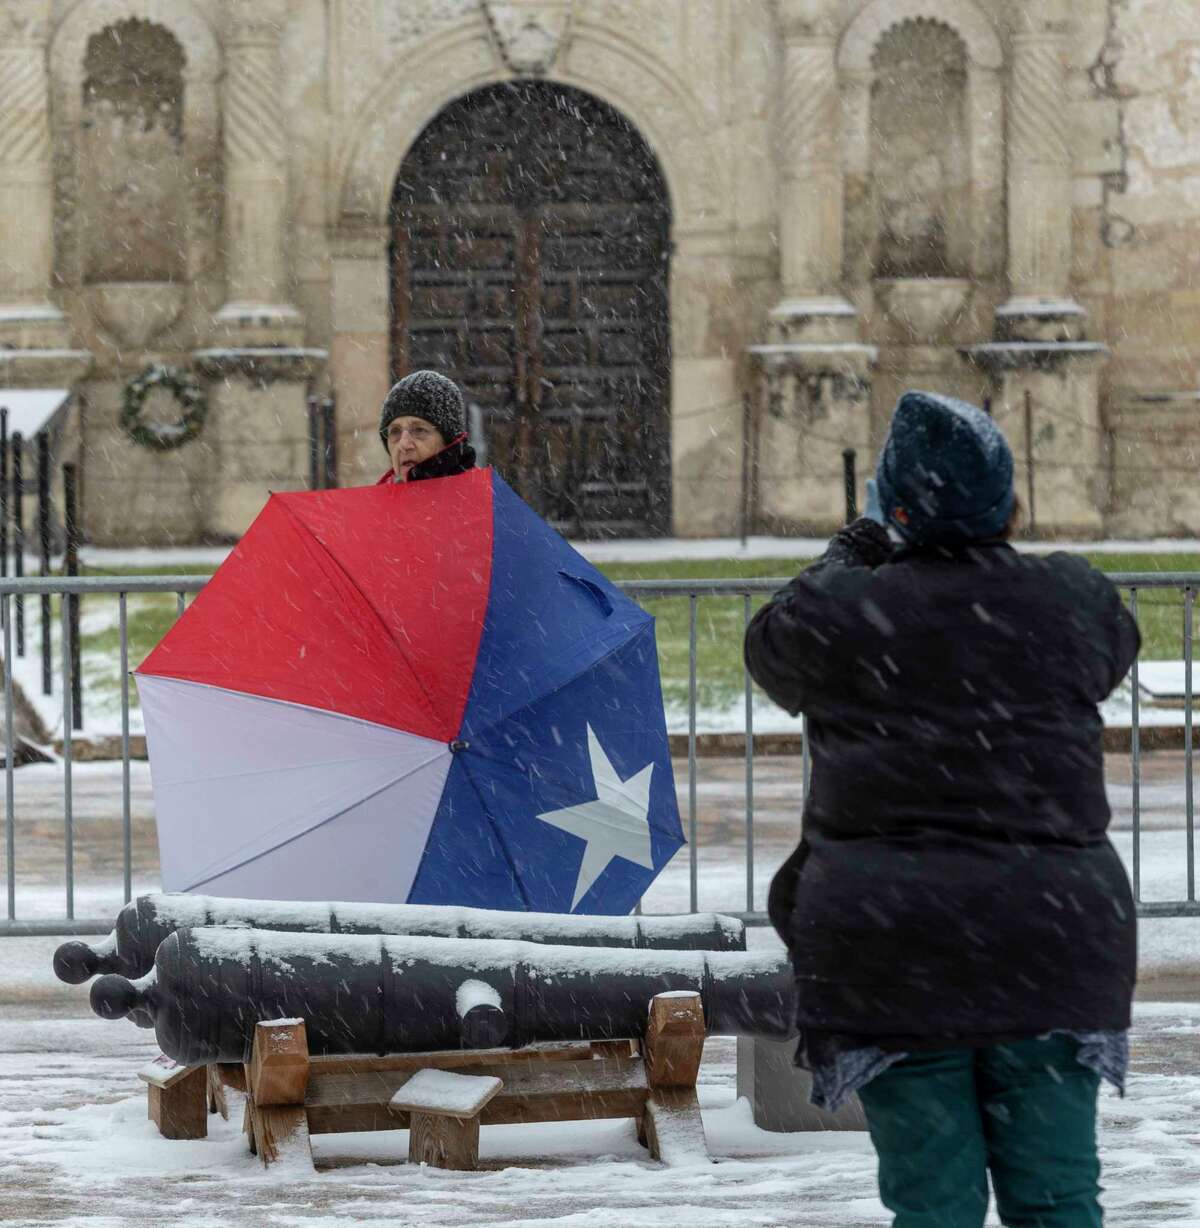 Ruth Madorsky takes a picture Thursday, Feb. 18, 2021, in front of the Alamo as snow returns to San Antonio.